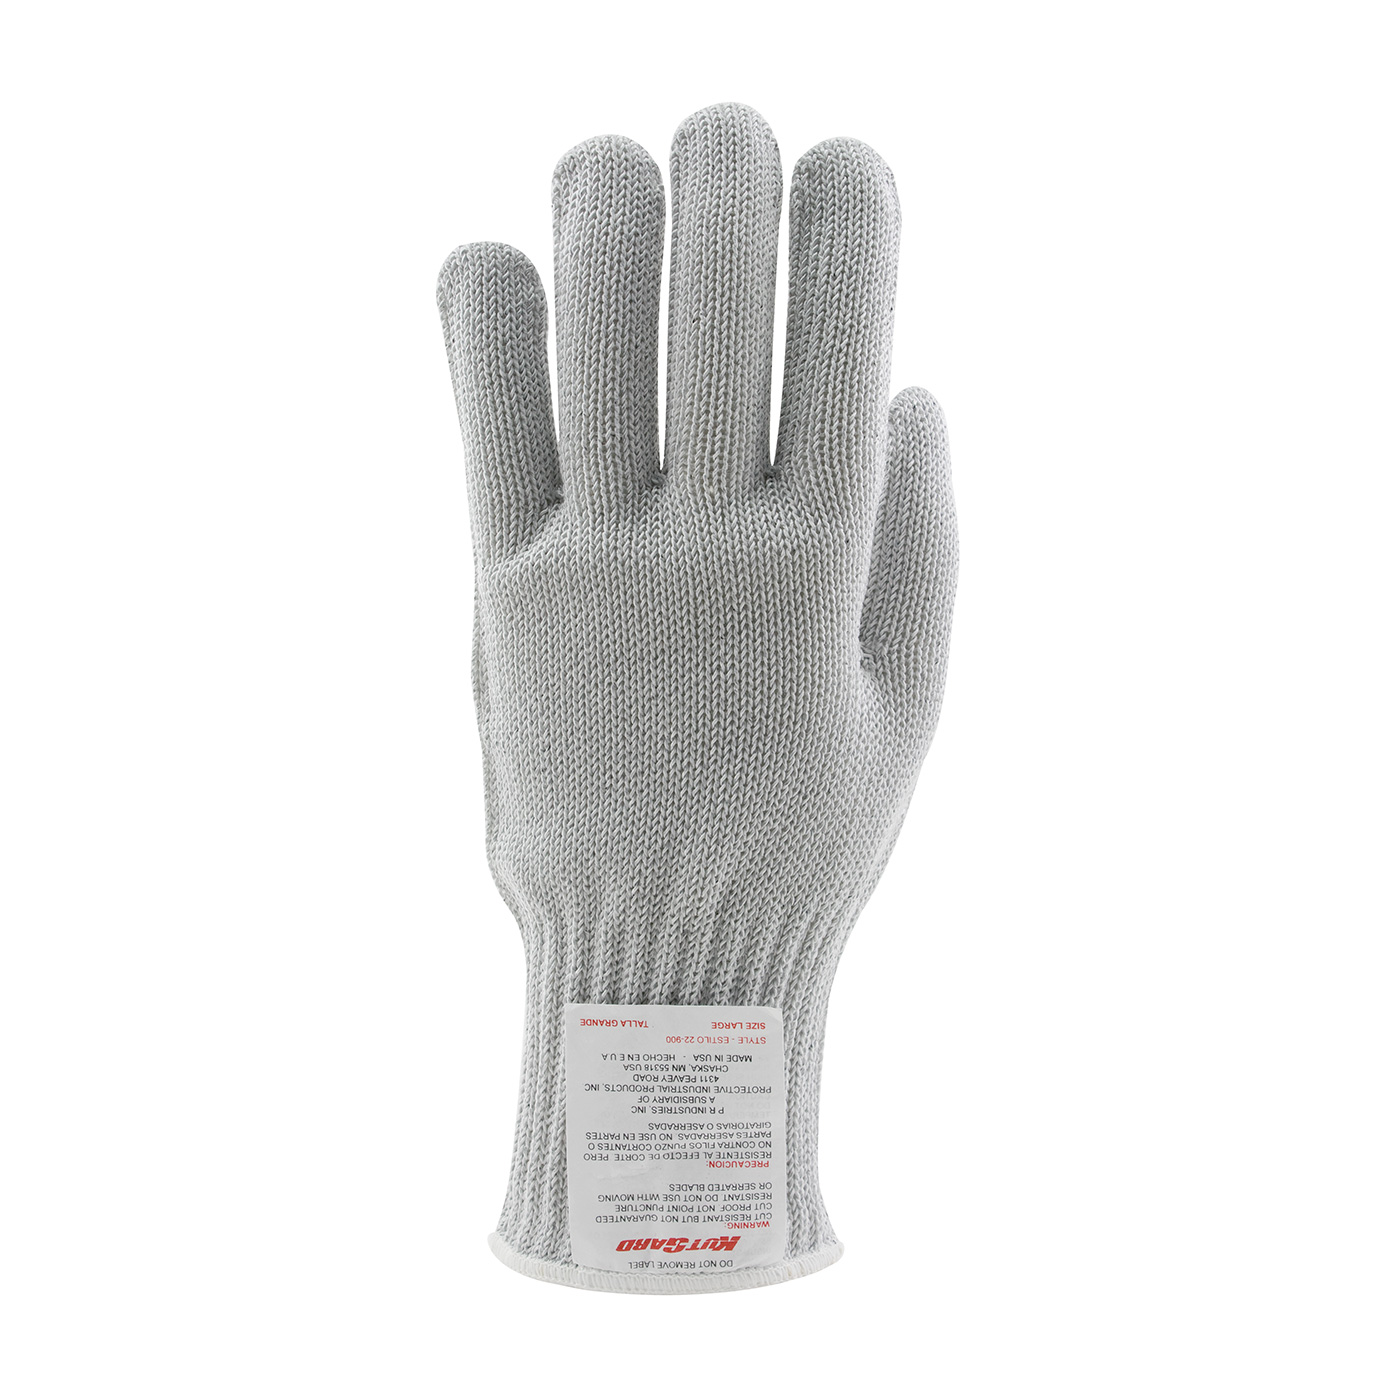 22-900 PIP® Medium Weight Claw Cover® Dyneema® Blended Antimicrobial Glove -